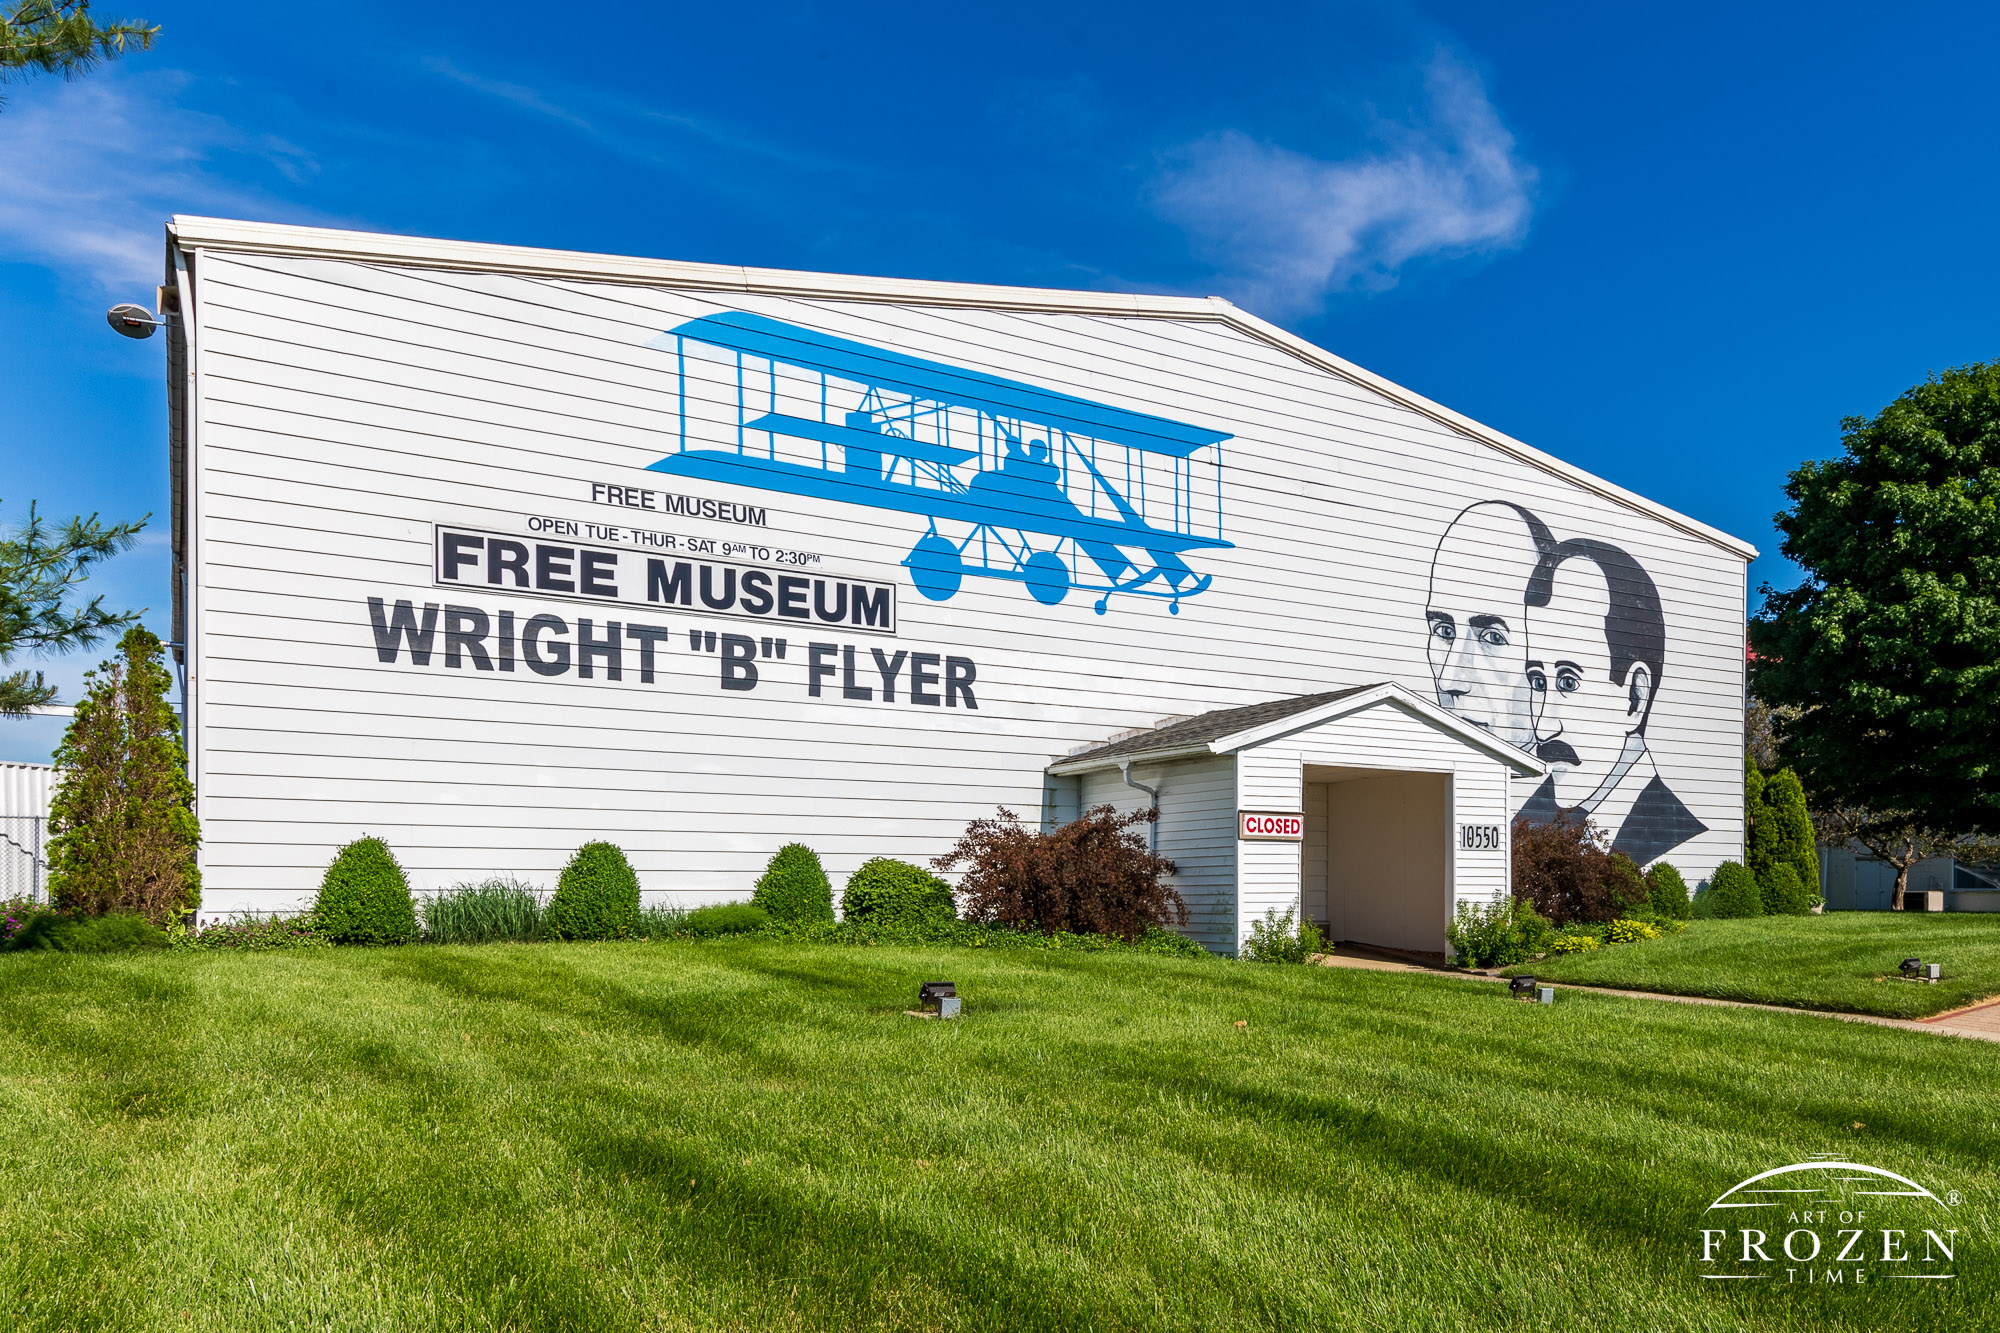 Mural of the Wright Brothers and their Wright B Flyer on a June evening